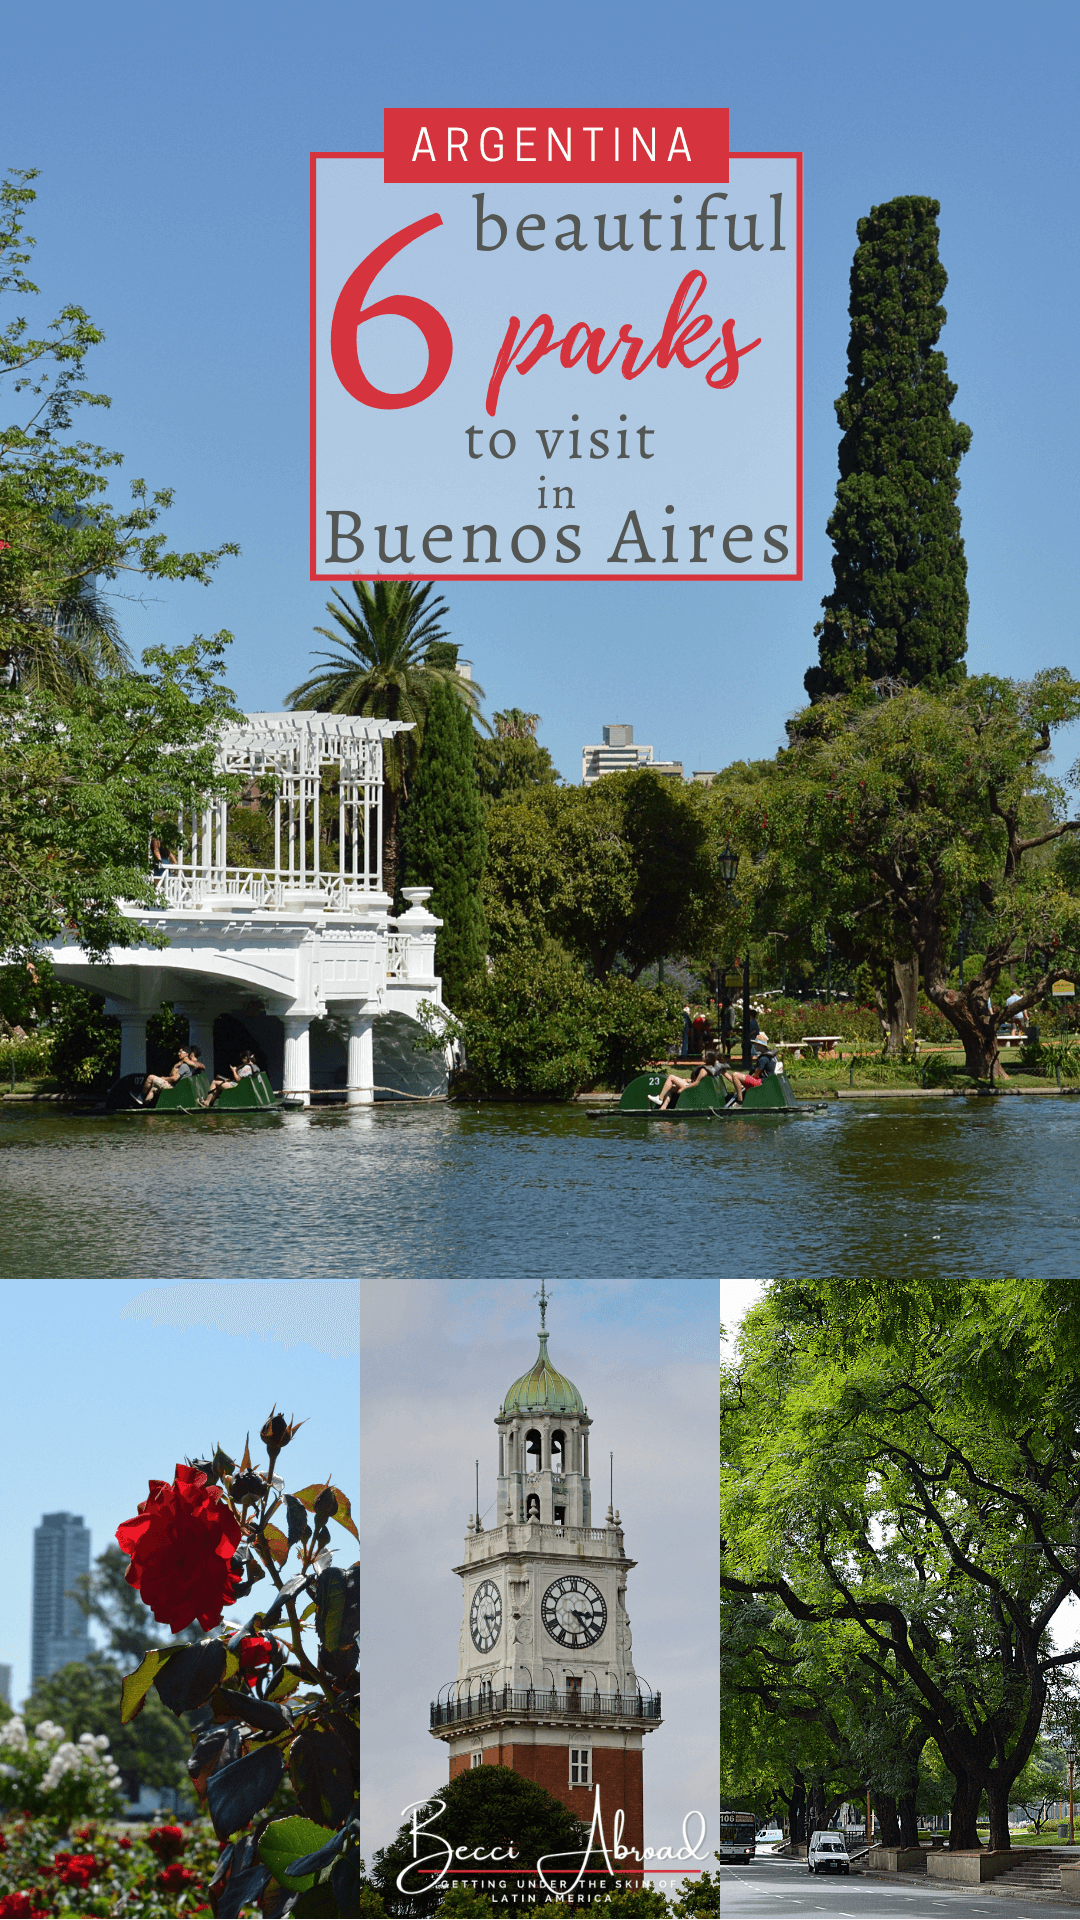 Enjoy some of the many green spots in Buenos Aires with this guide to some of the most beautiful parks in Buenos Aires!